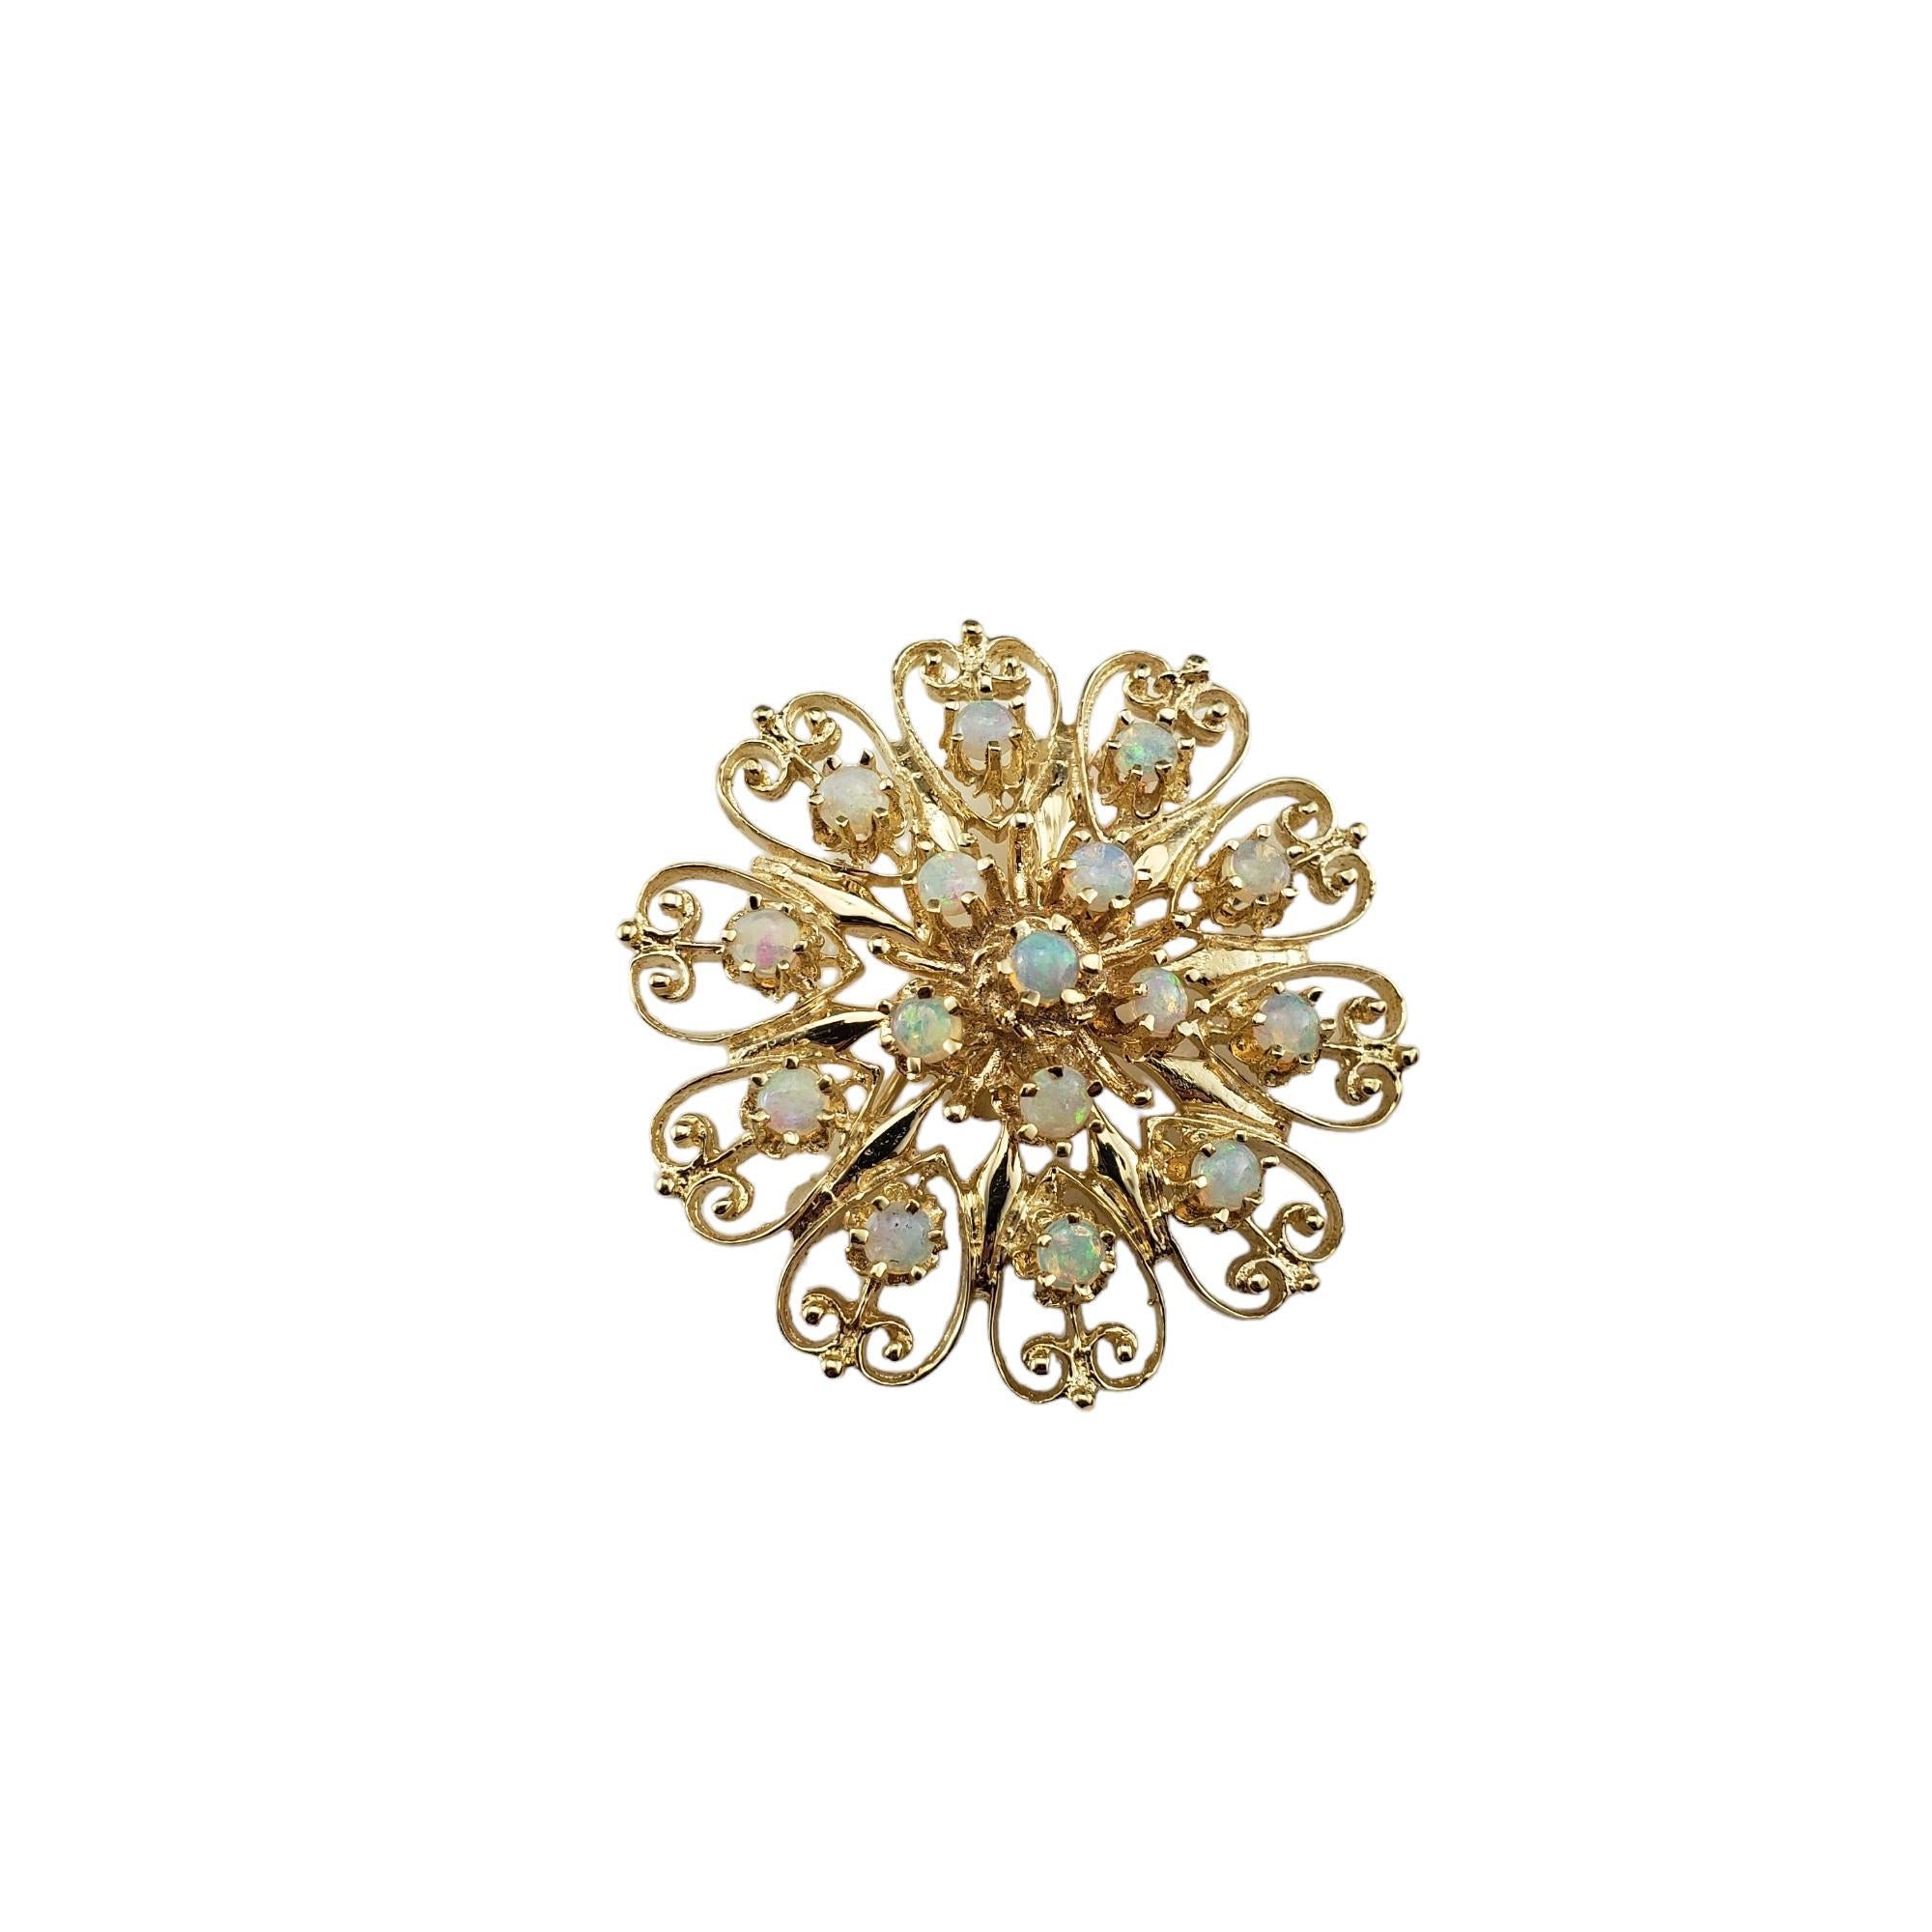 Vintage 14 Karat Yellow Gold and Opal Brooch/Pendant-

This elegant brooch features 16 round opal gemstones set in beautifully detailed 14K yellow gold.  Can be worn as a brooch or a pendant.  

Matching earrings: #16739

Size: 38 mm

Stamped: